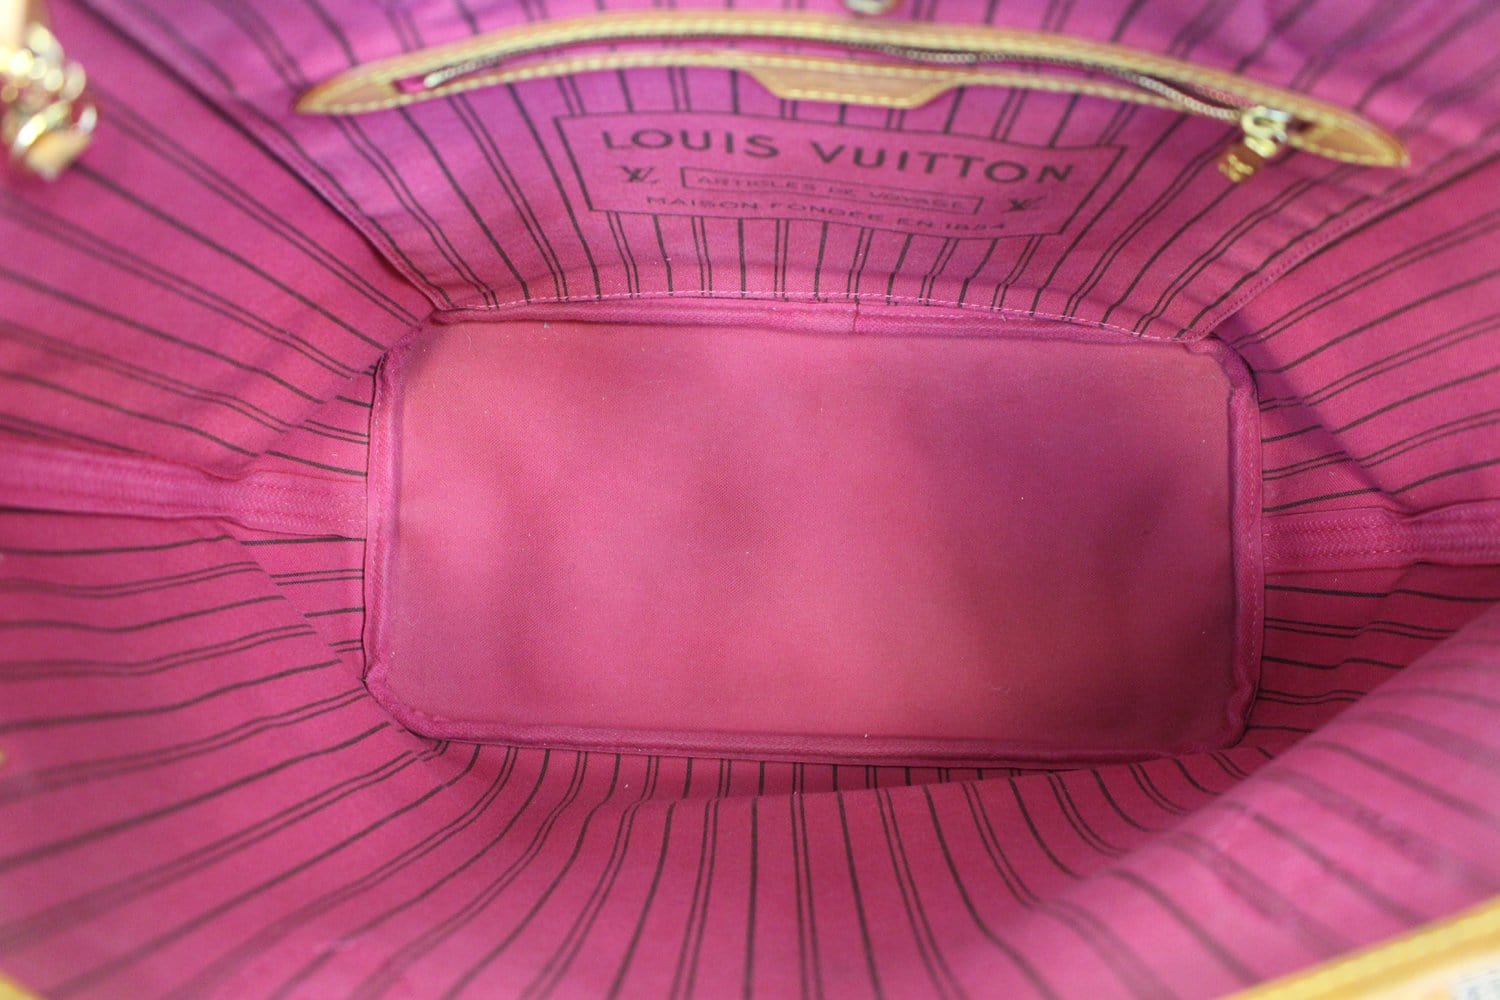 Louis Vuitton Bag With Pink Inside